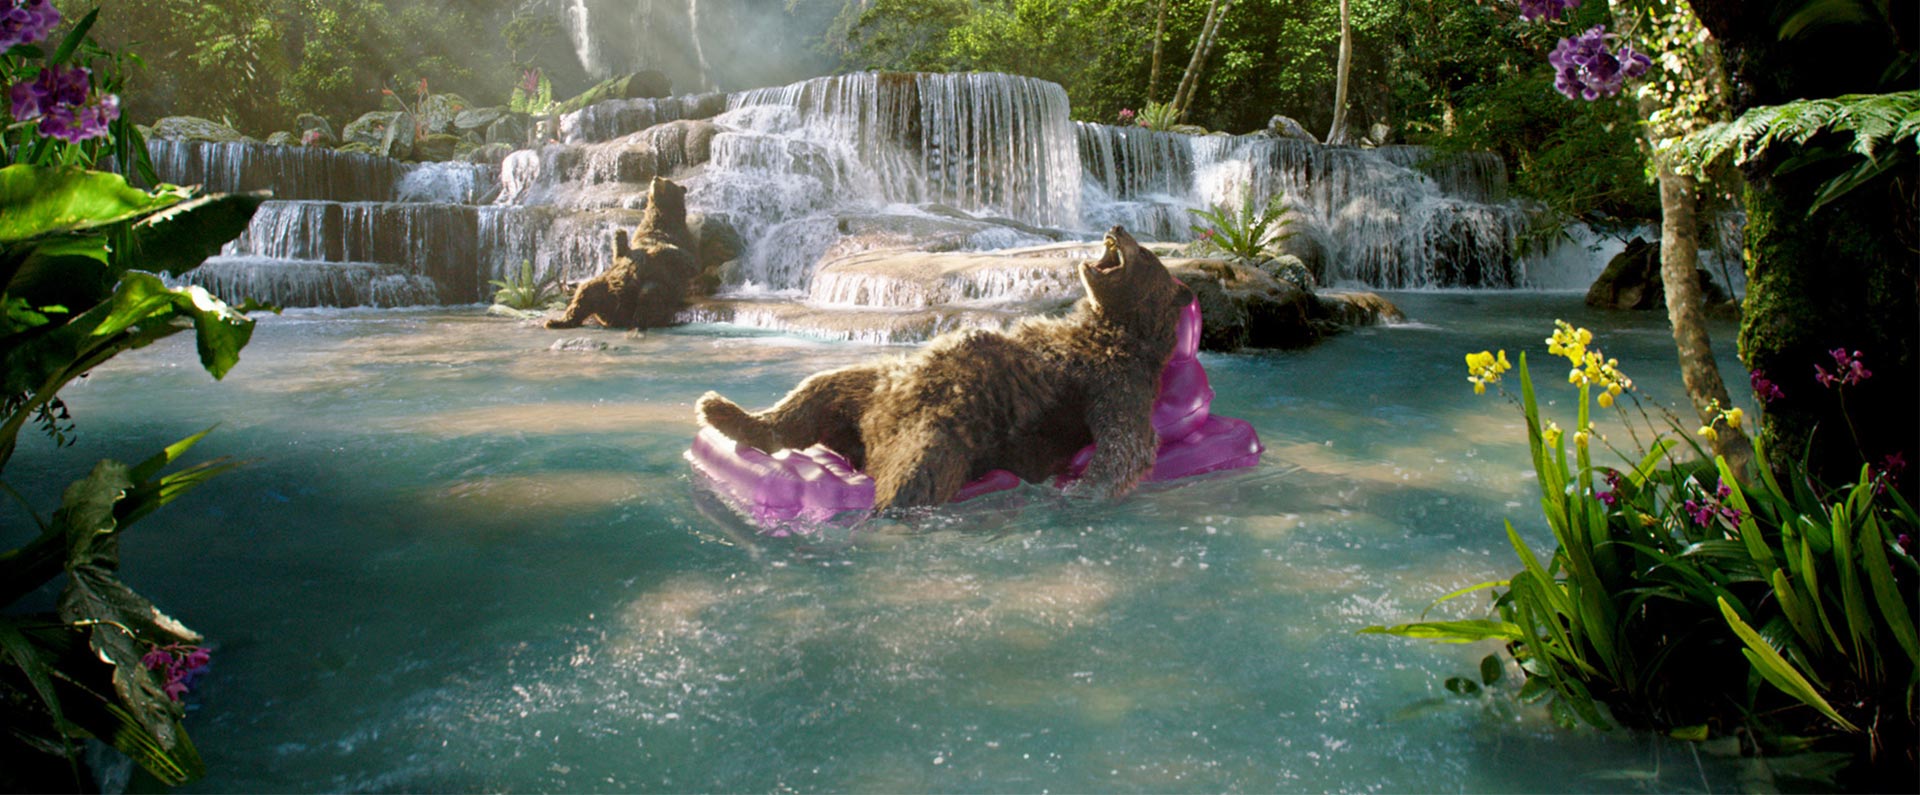 Bears on inflatables lounging in a lake an a waterfall